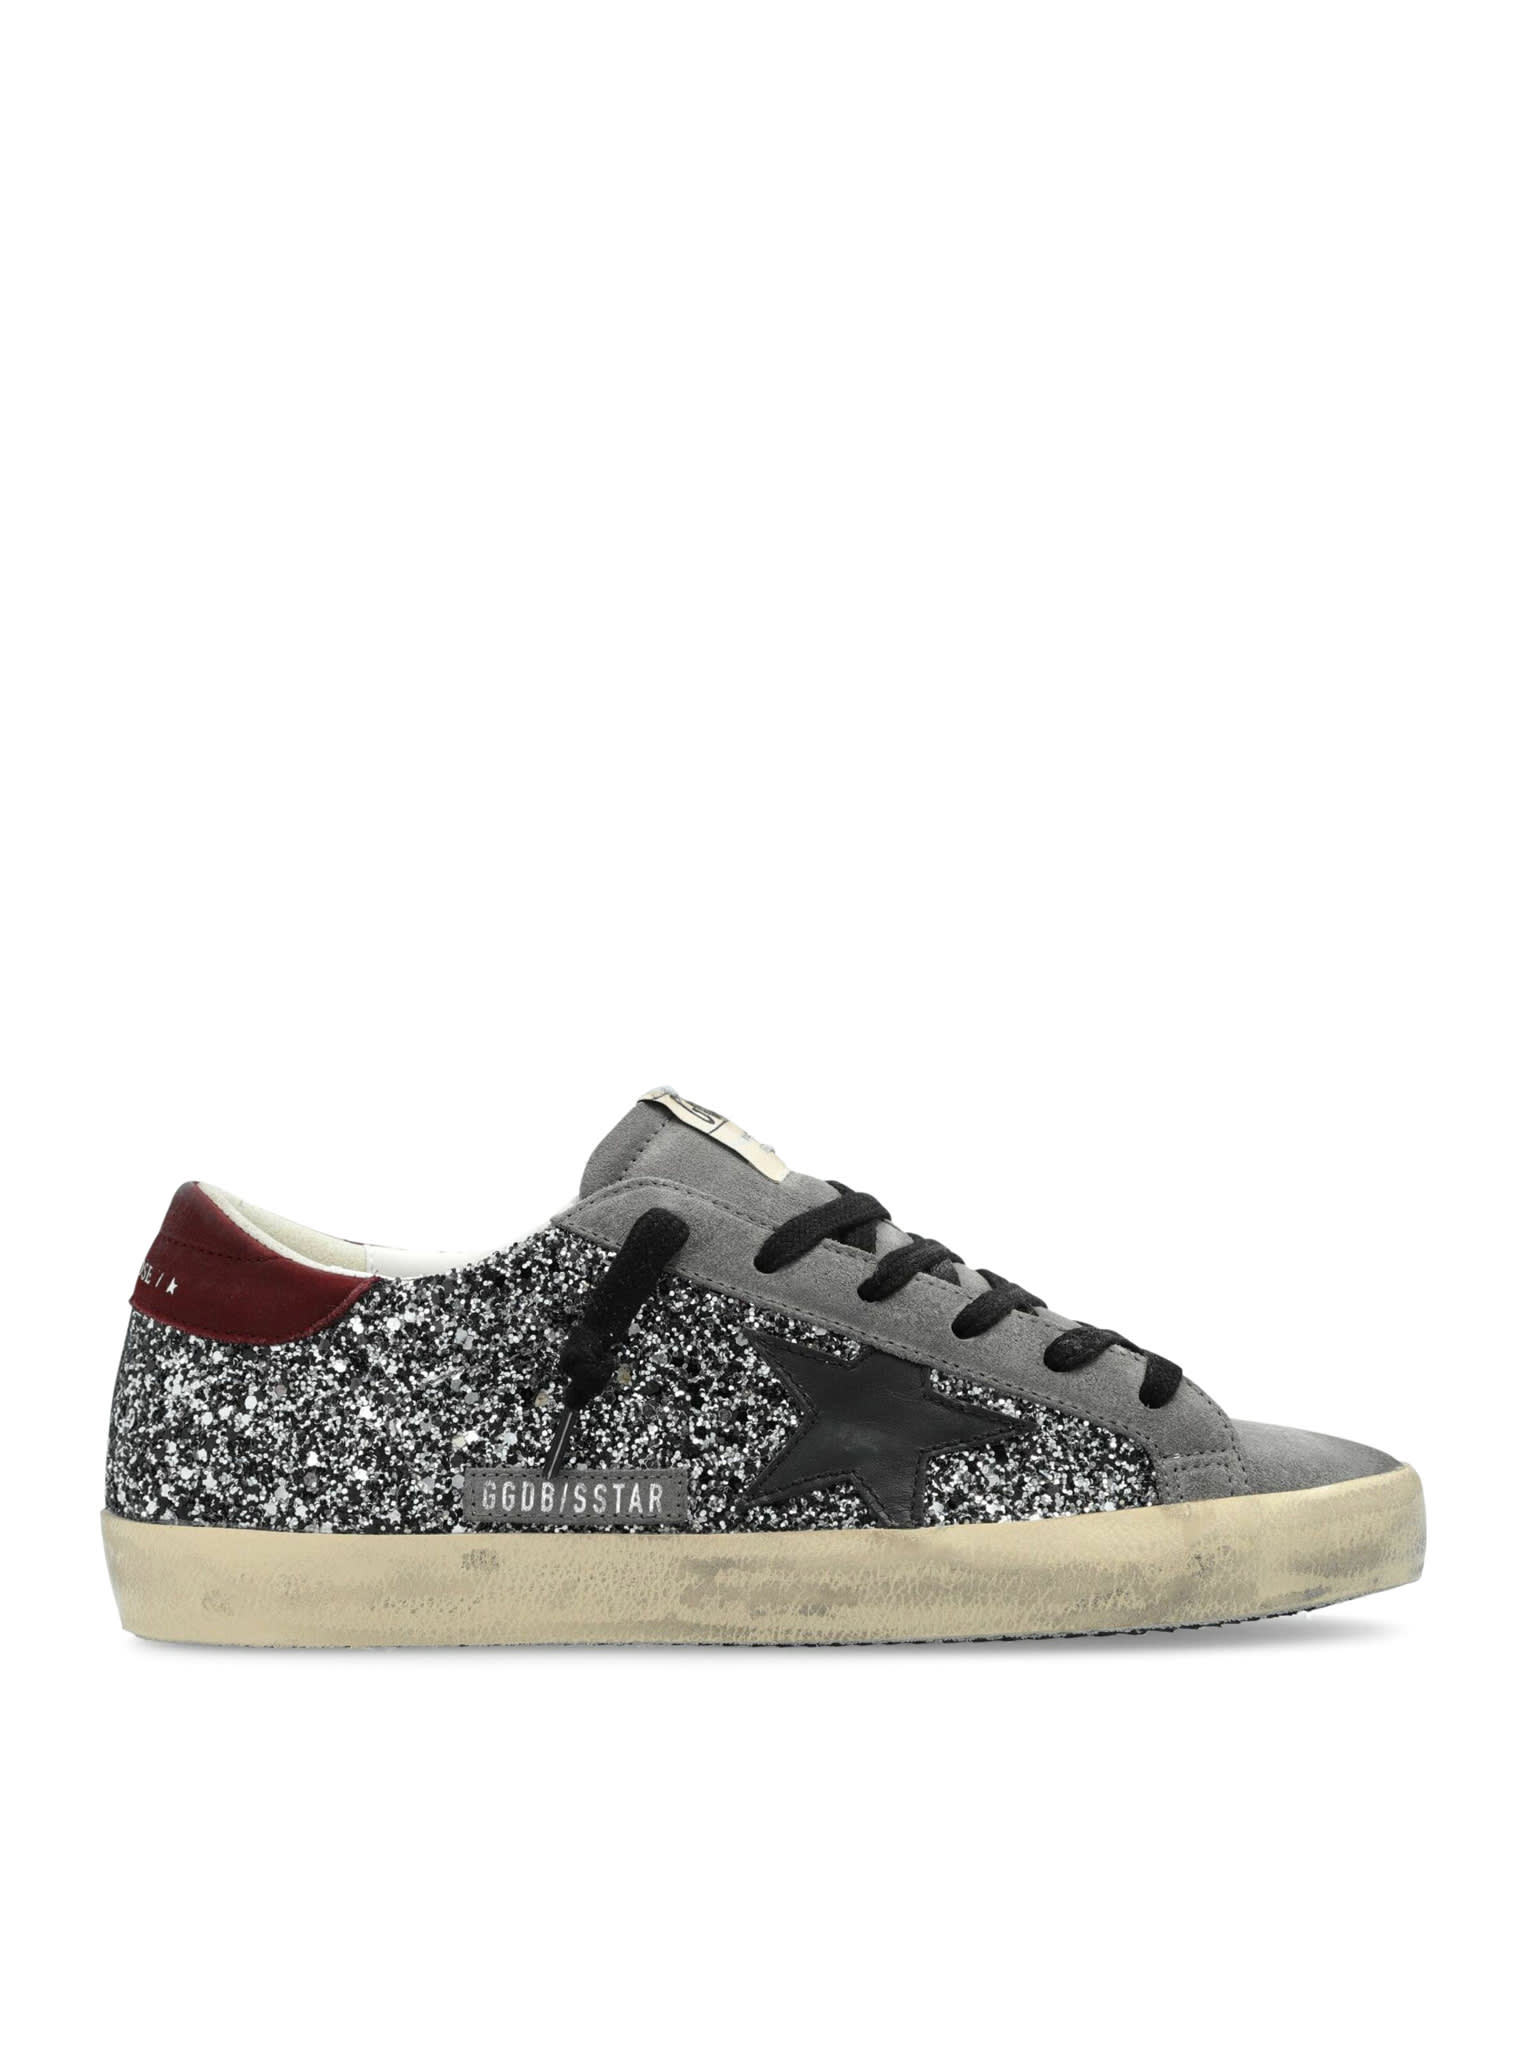 Golden Goose Super Star Glitter Upper Suede Toe Leather Star And Heel In Gray